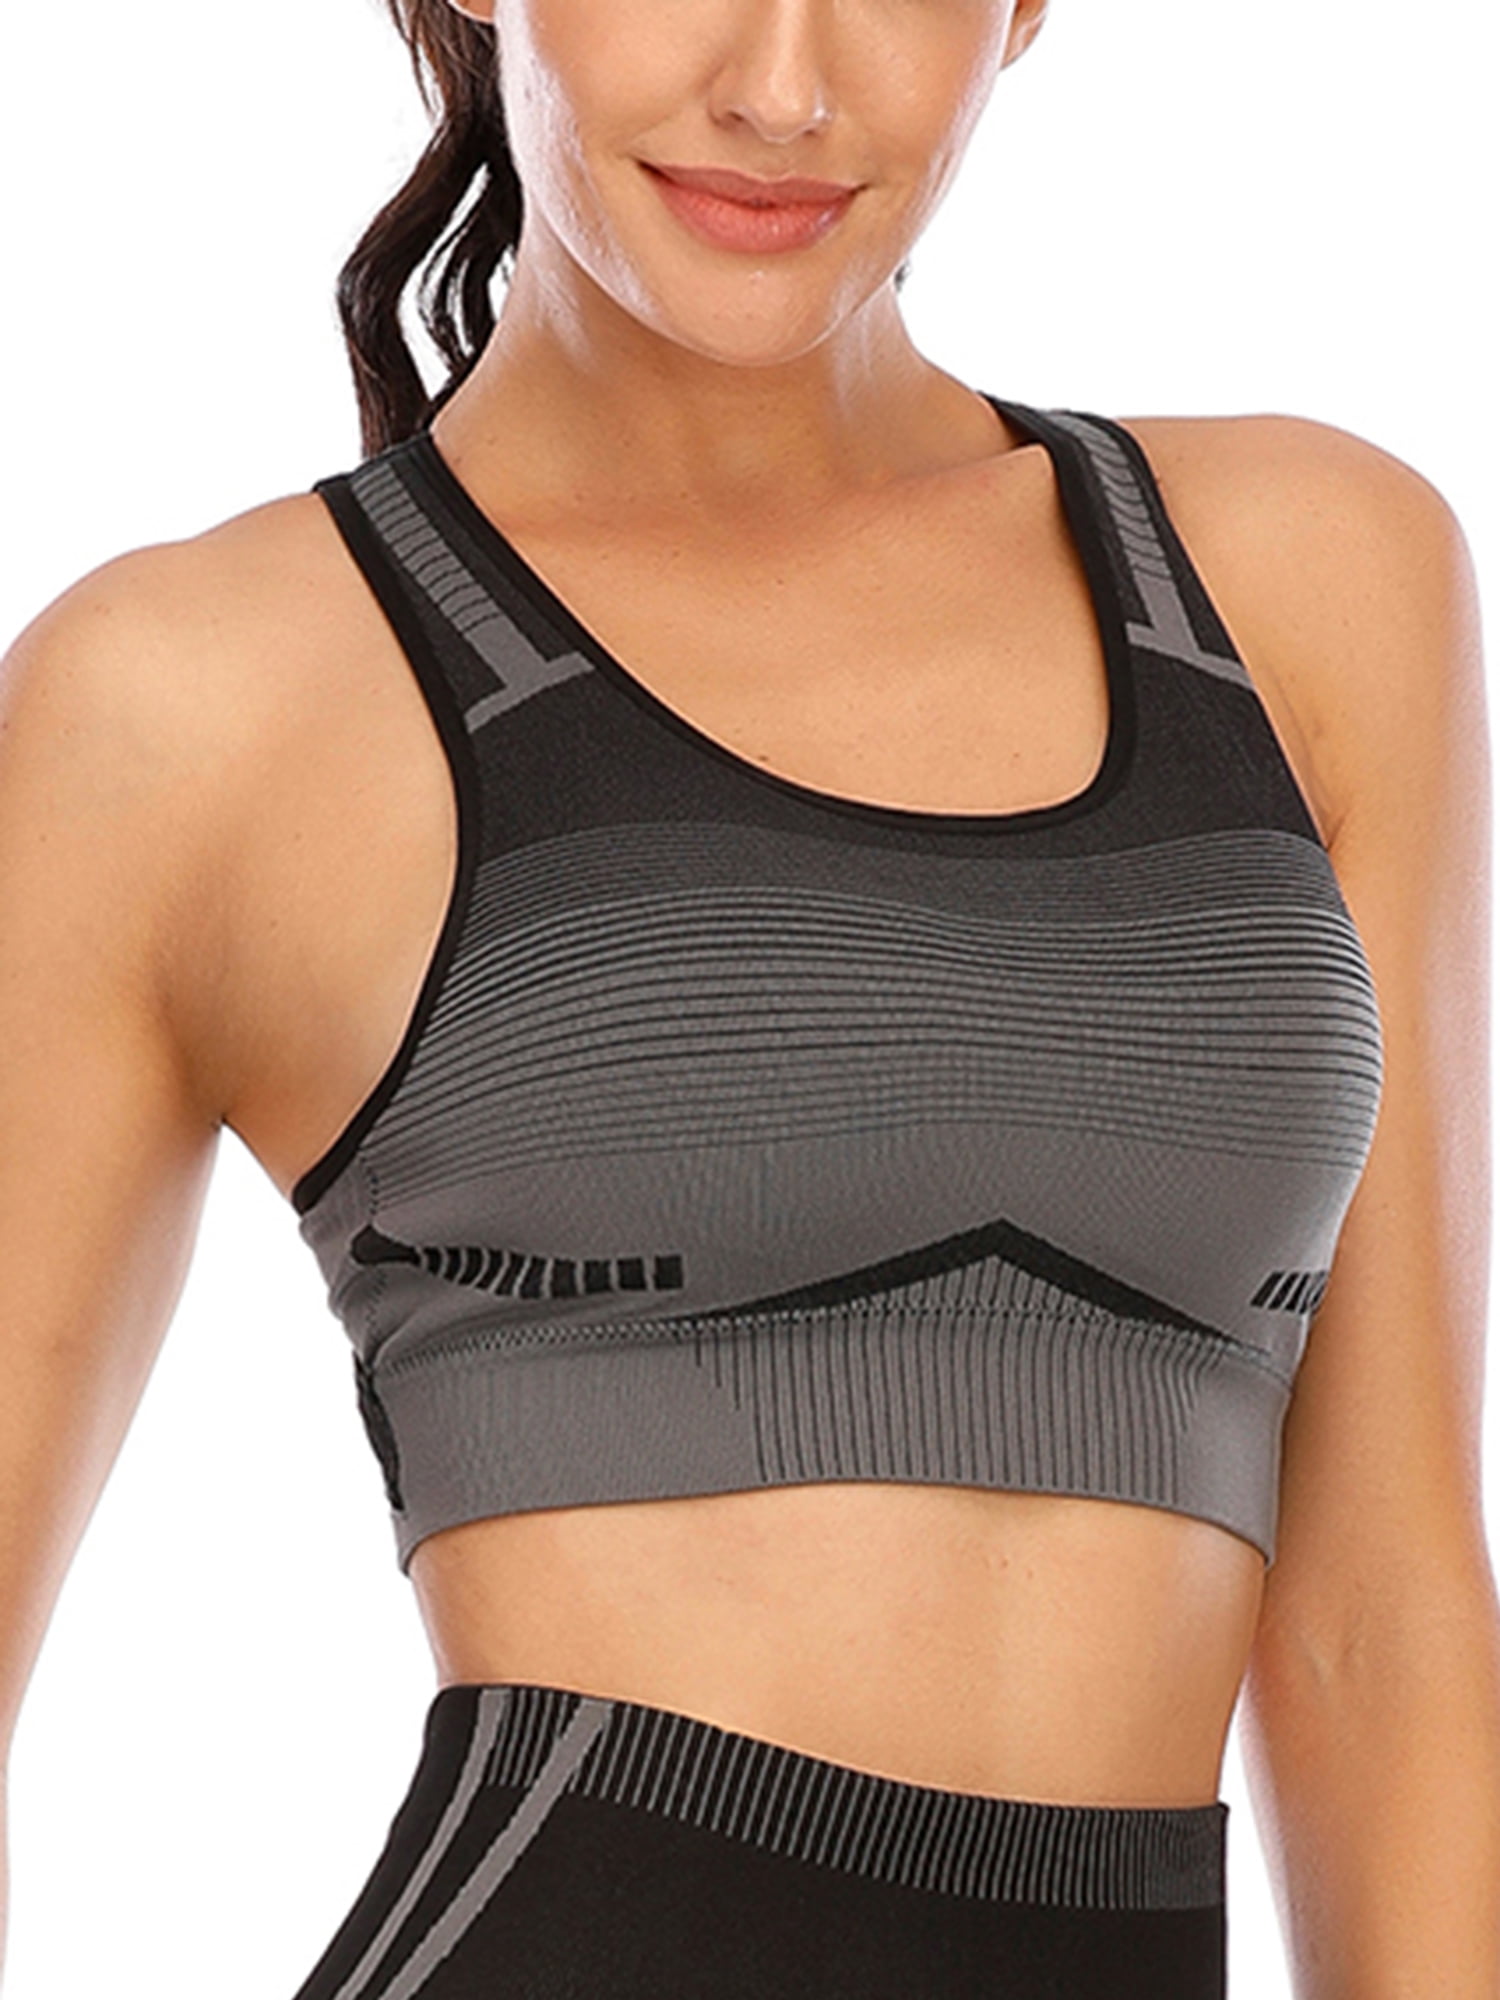 TWO PACK Sports Bras High Impact No Wire Racerback Dry Cool Comfy S/M/L/XL 